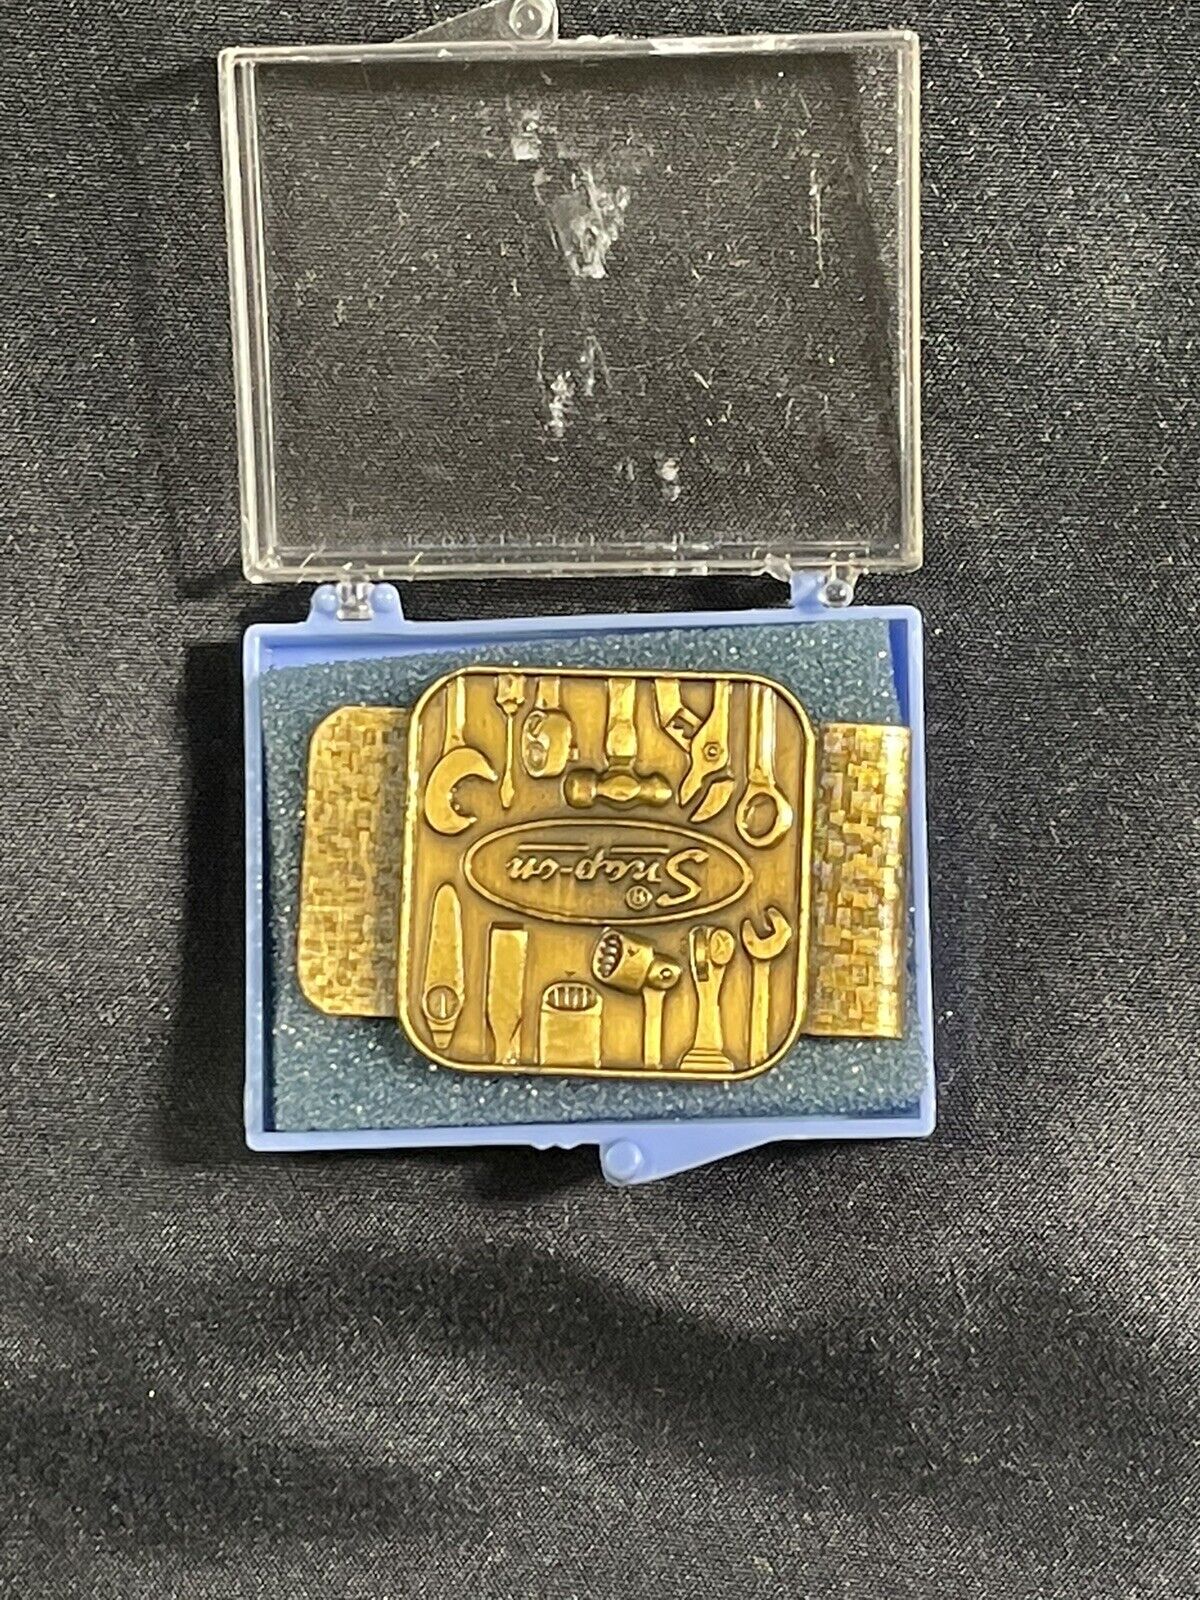 New SNAP-ON-TOOLS Brass Money Clip.